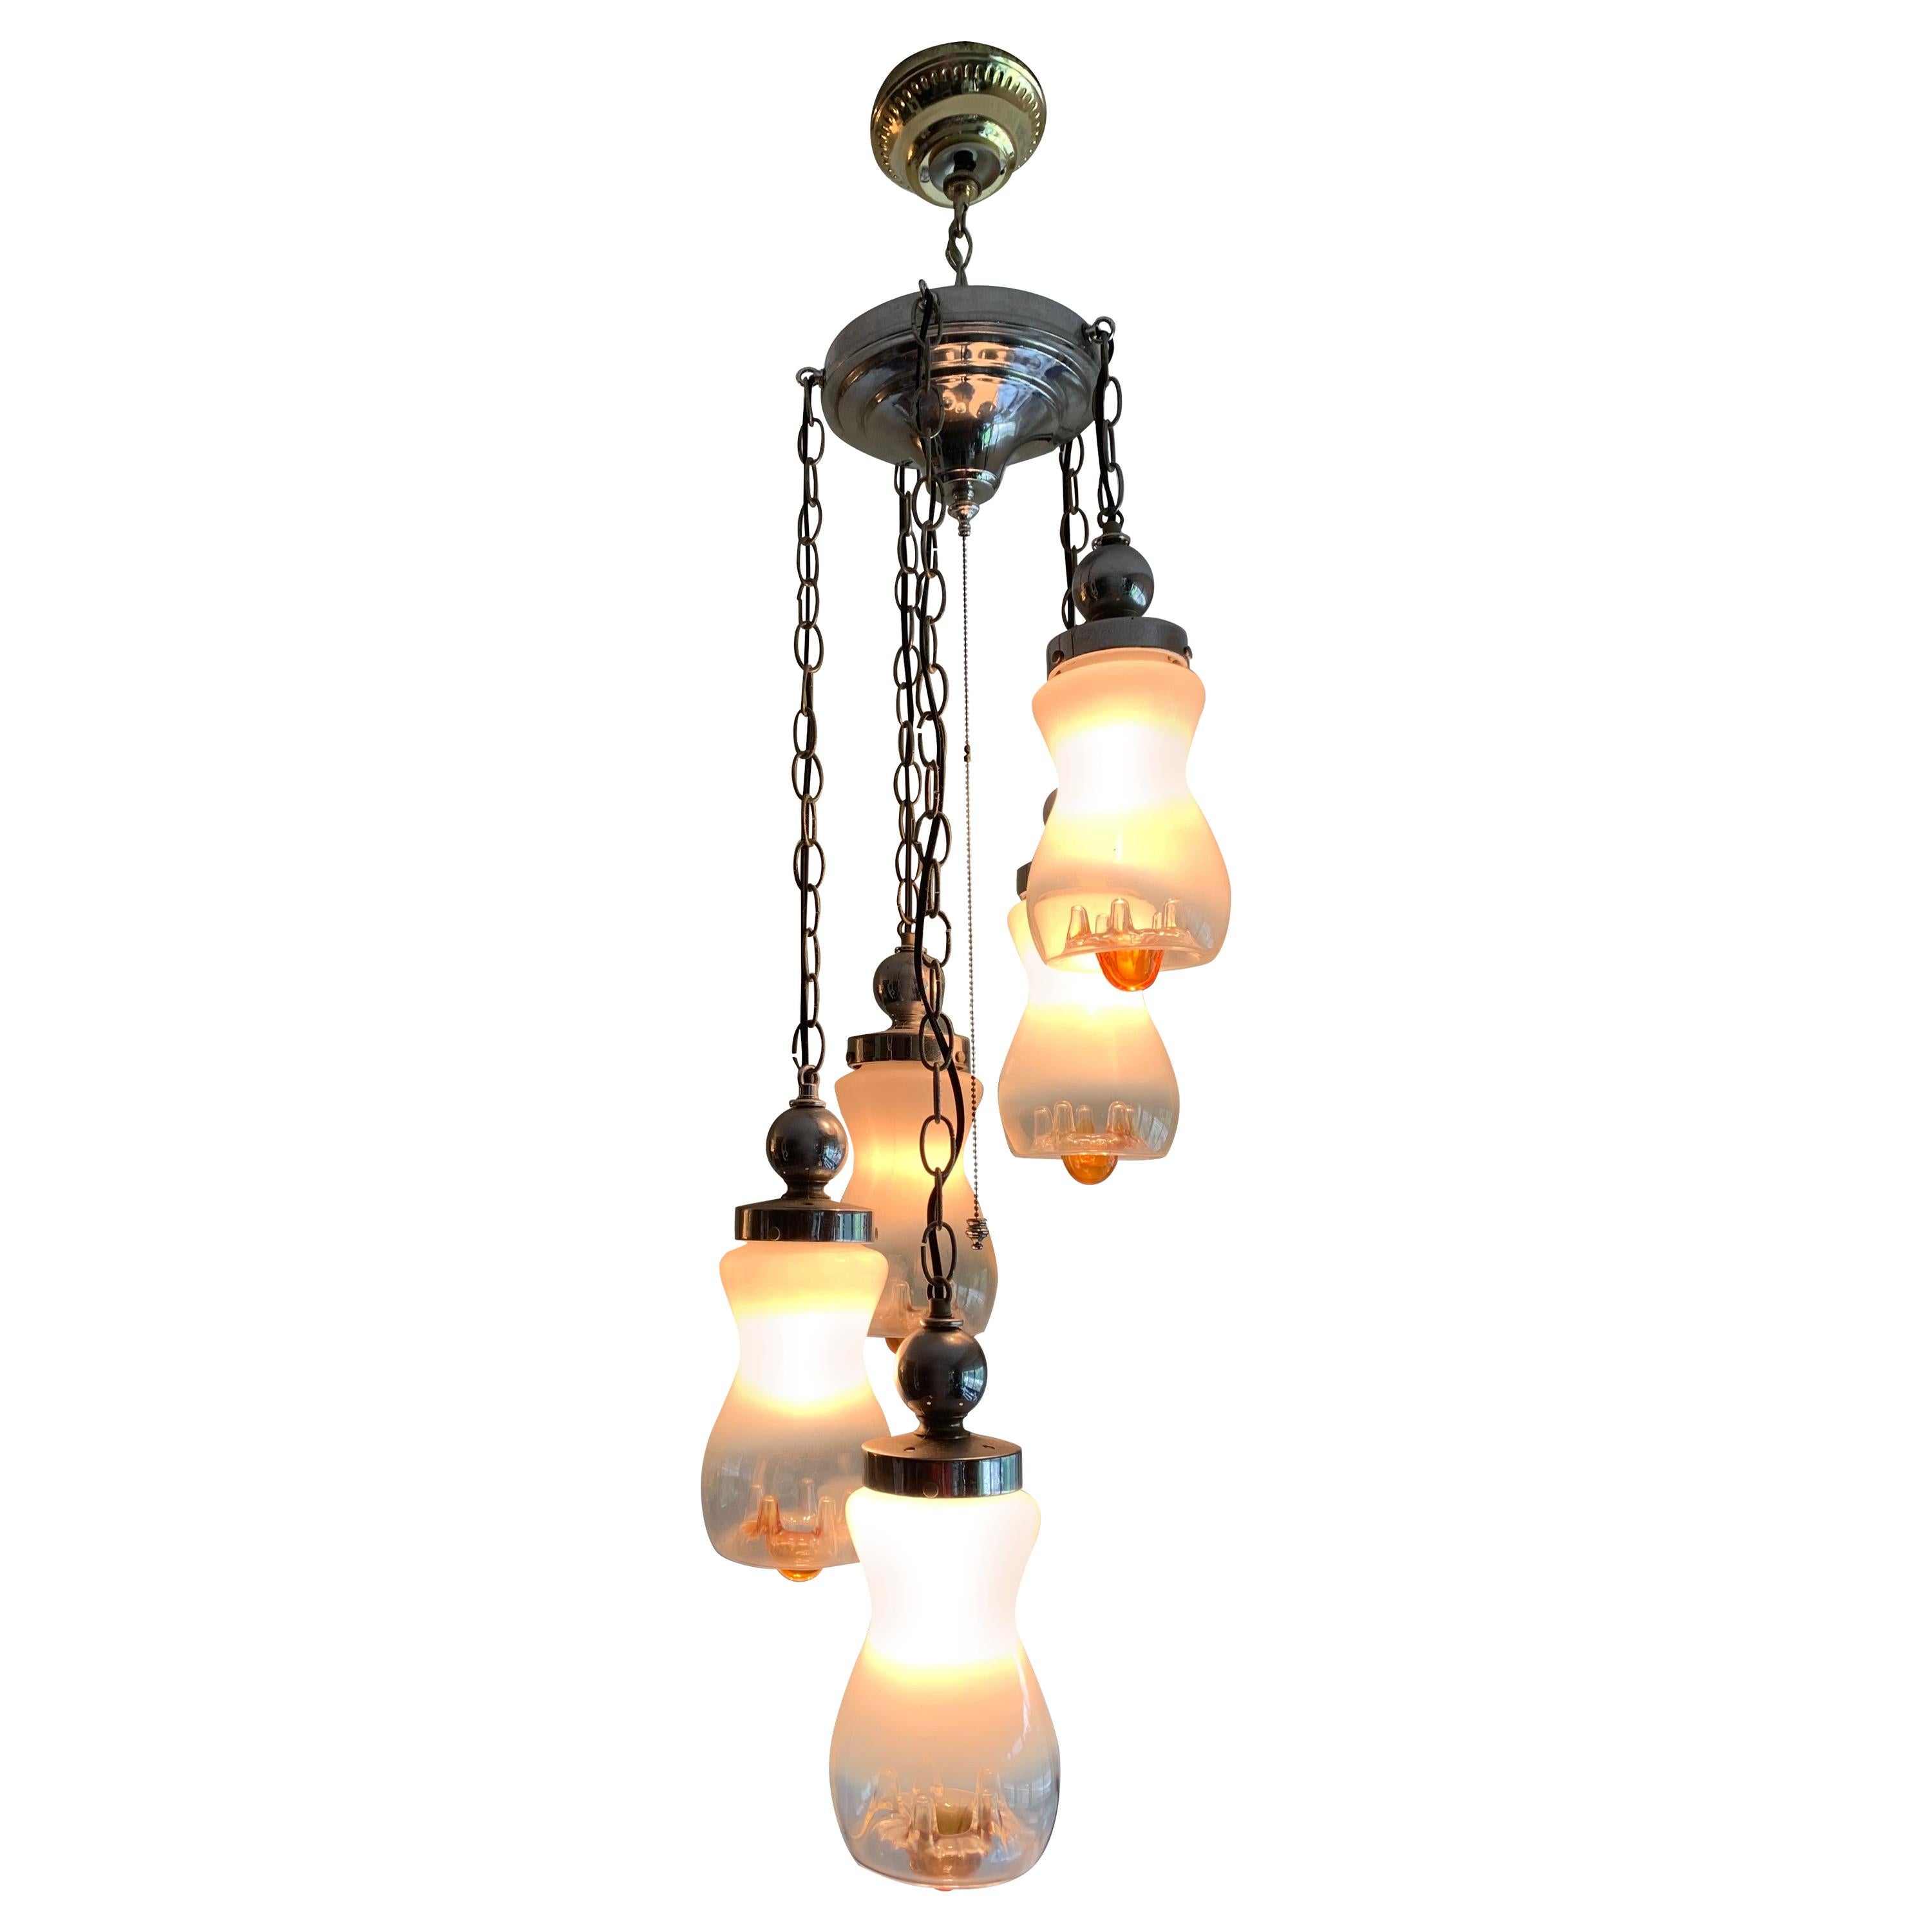 Vintage Cascading Spiked Glass Lighting